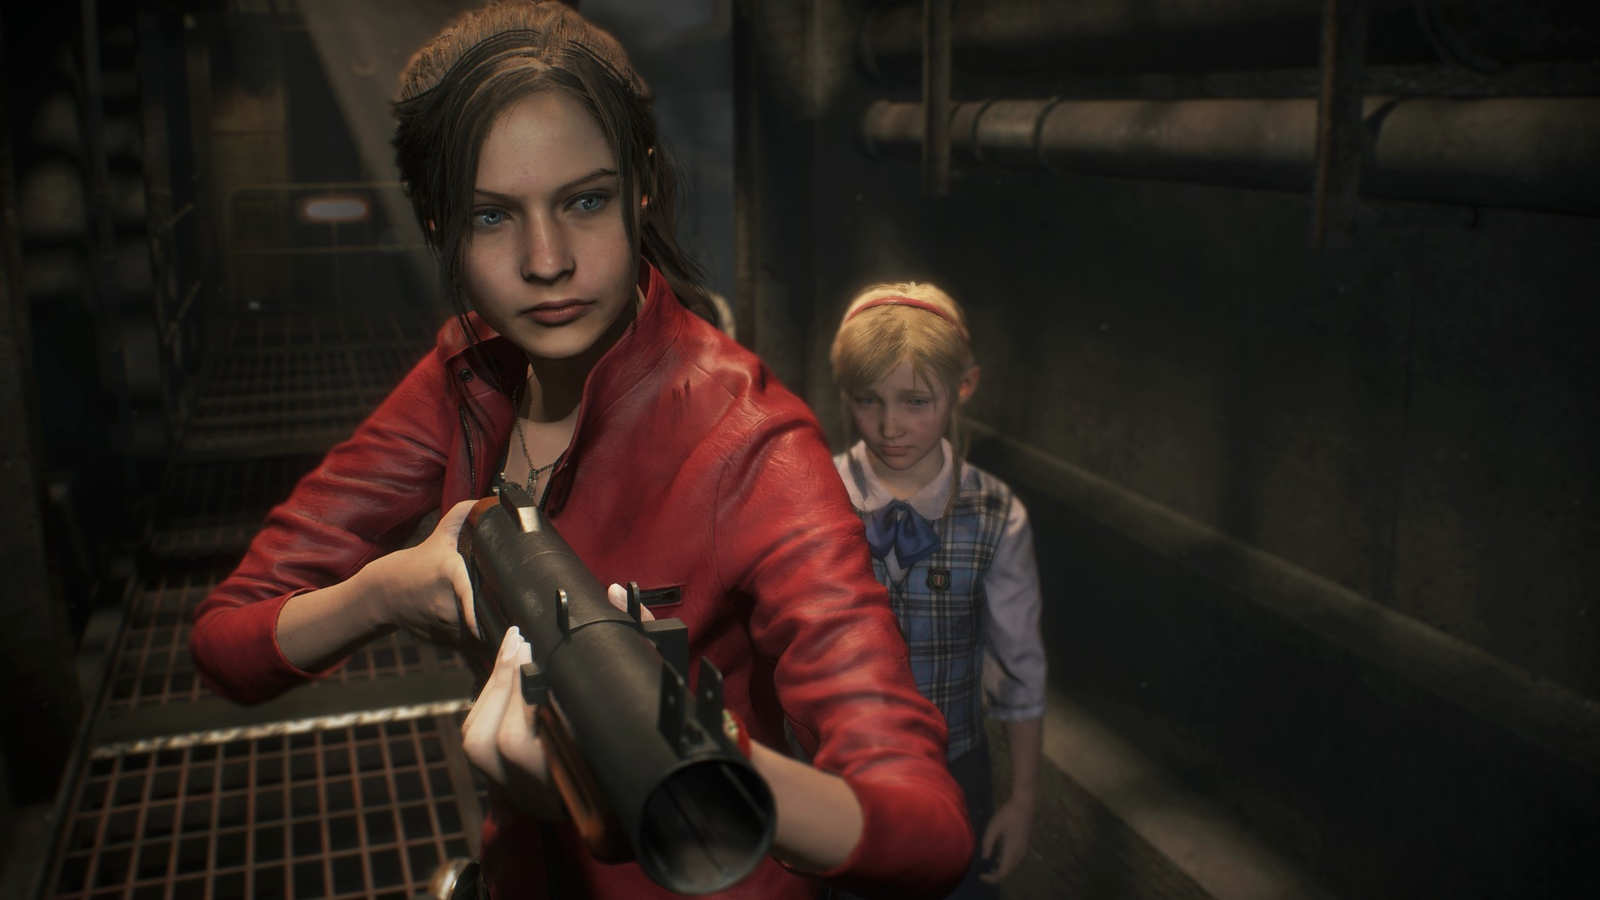 The First 15 Minutes of Resident Evil 2 Gameplay - Claire Redfield